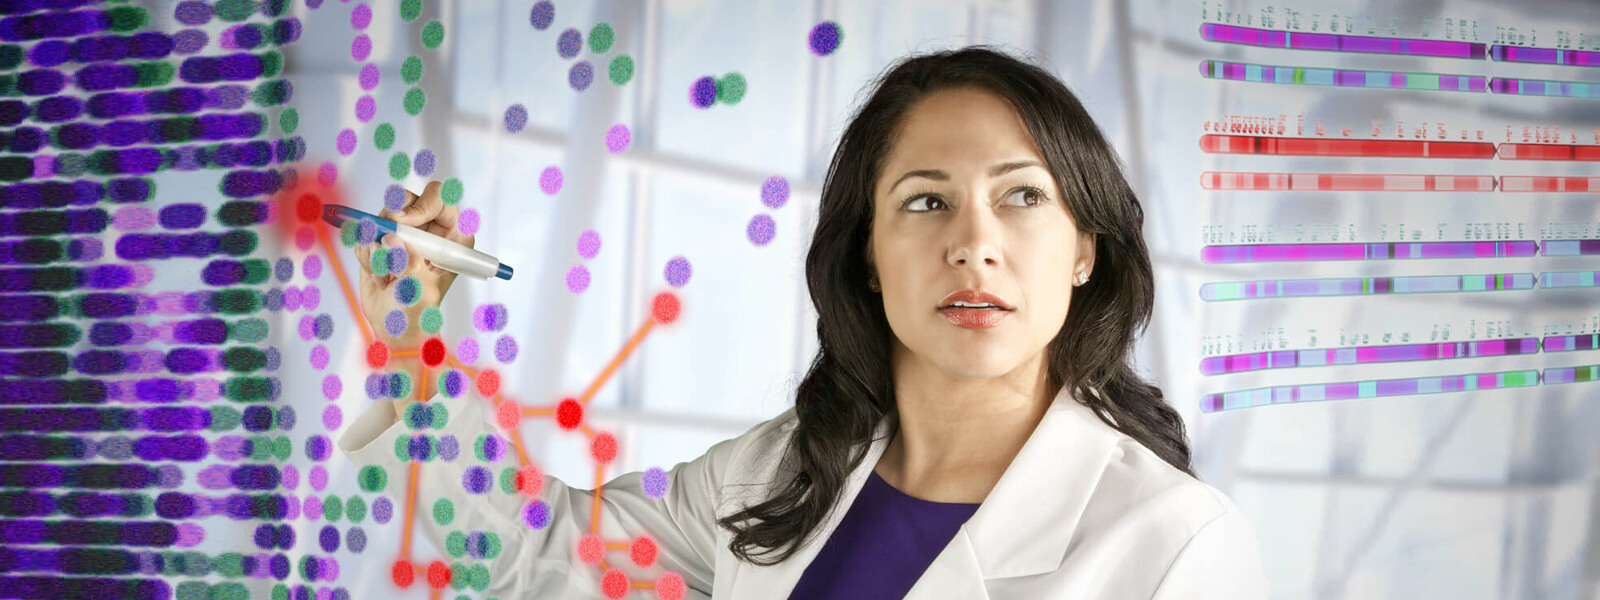 Data Doctors: How Biostatisticians Play a Critical Role in Discovering and Developing Medicine